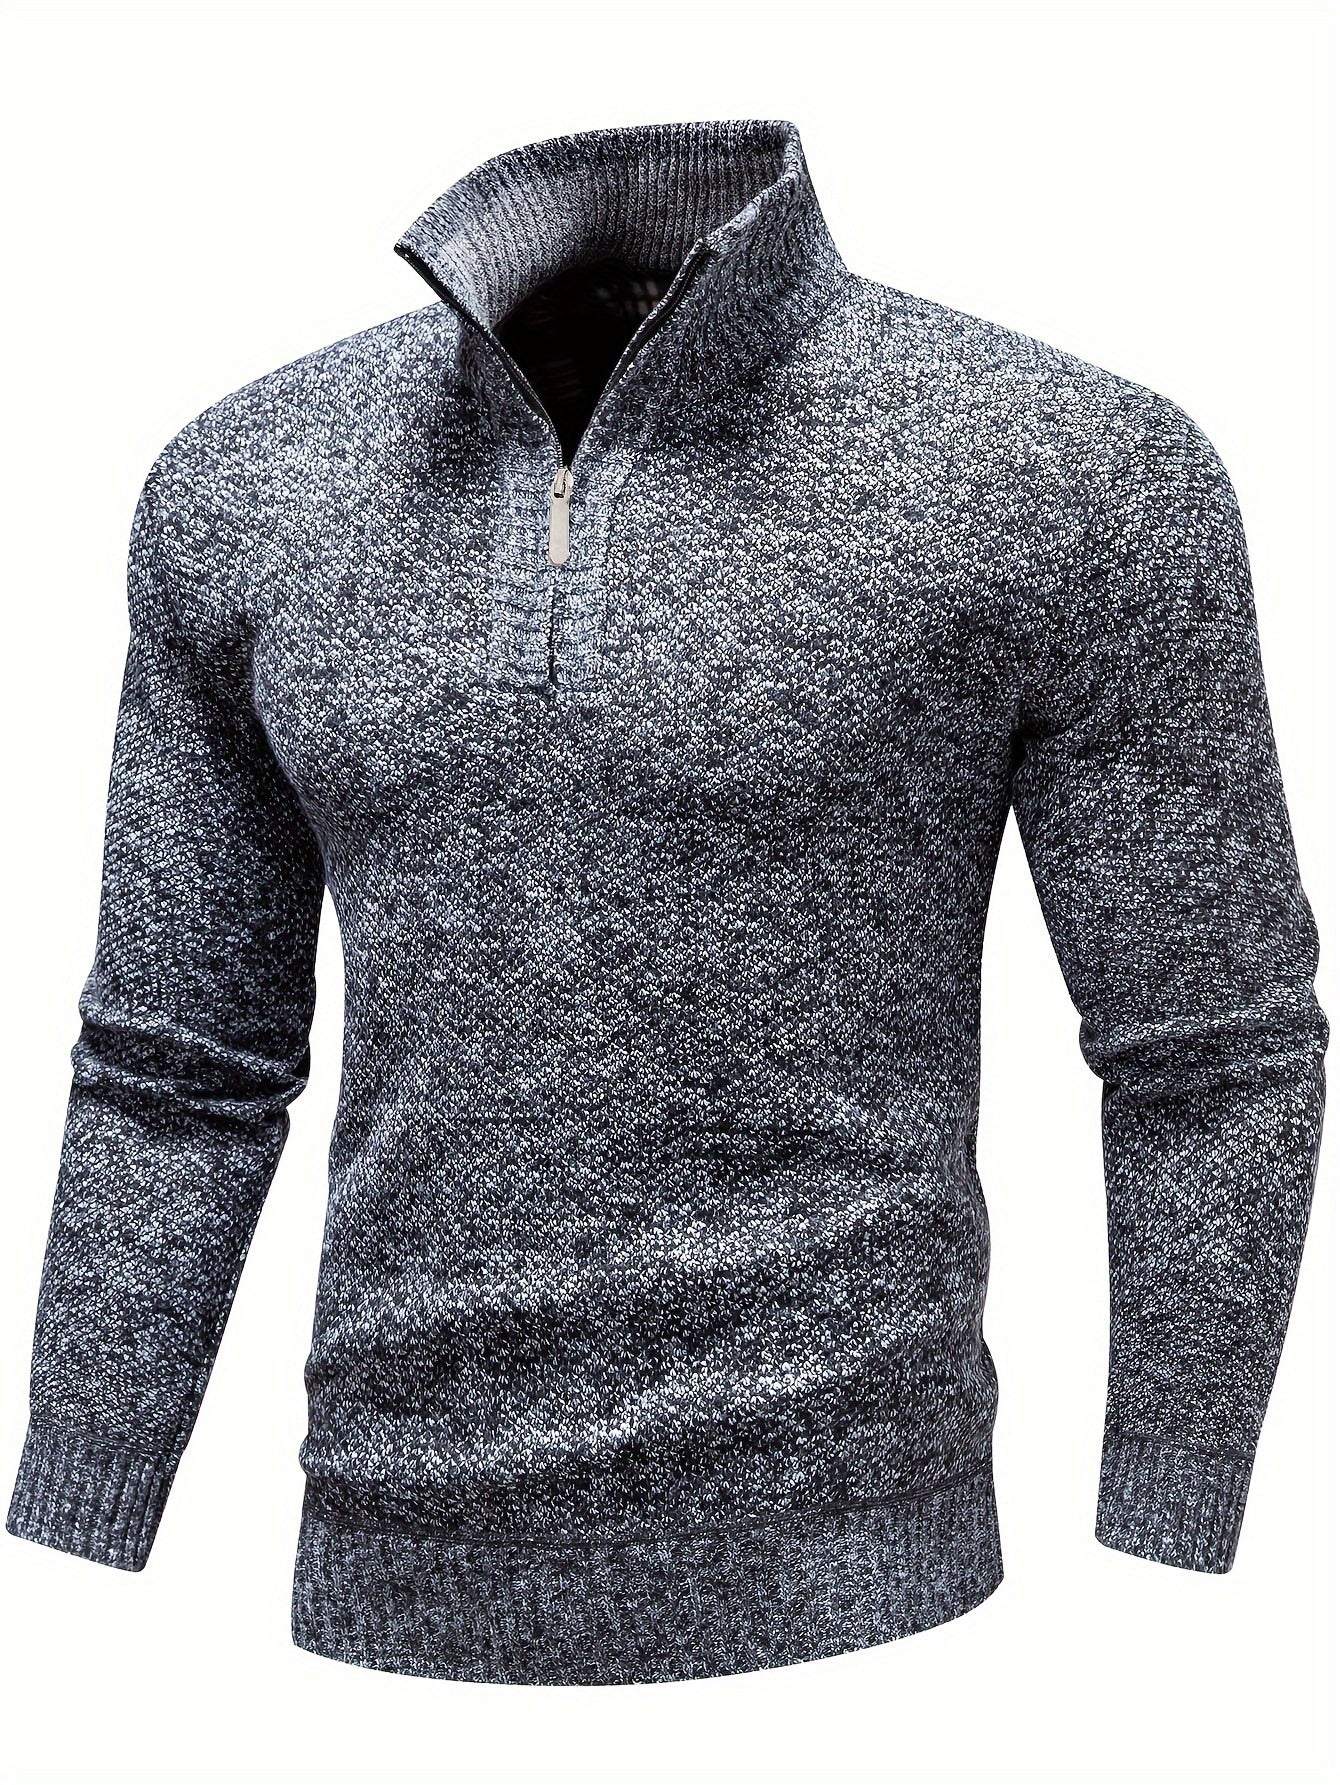 Chic Knit Sweater, Men's Casual Lapel Slightly Stretch V-Neck Pullover Sweater For Men Winter Fall